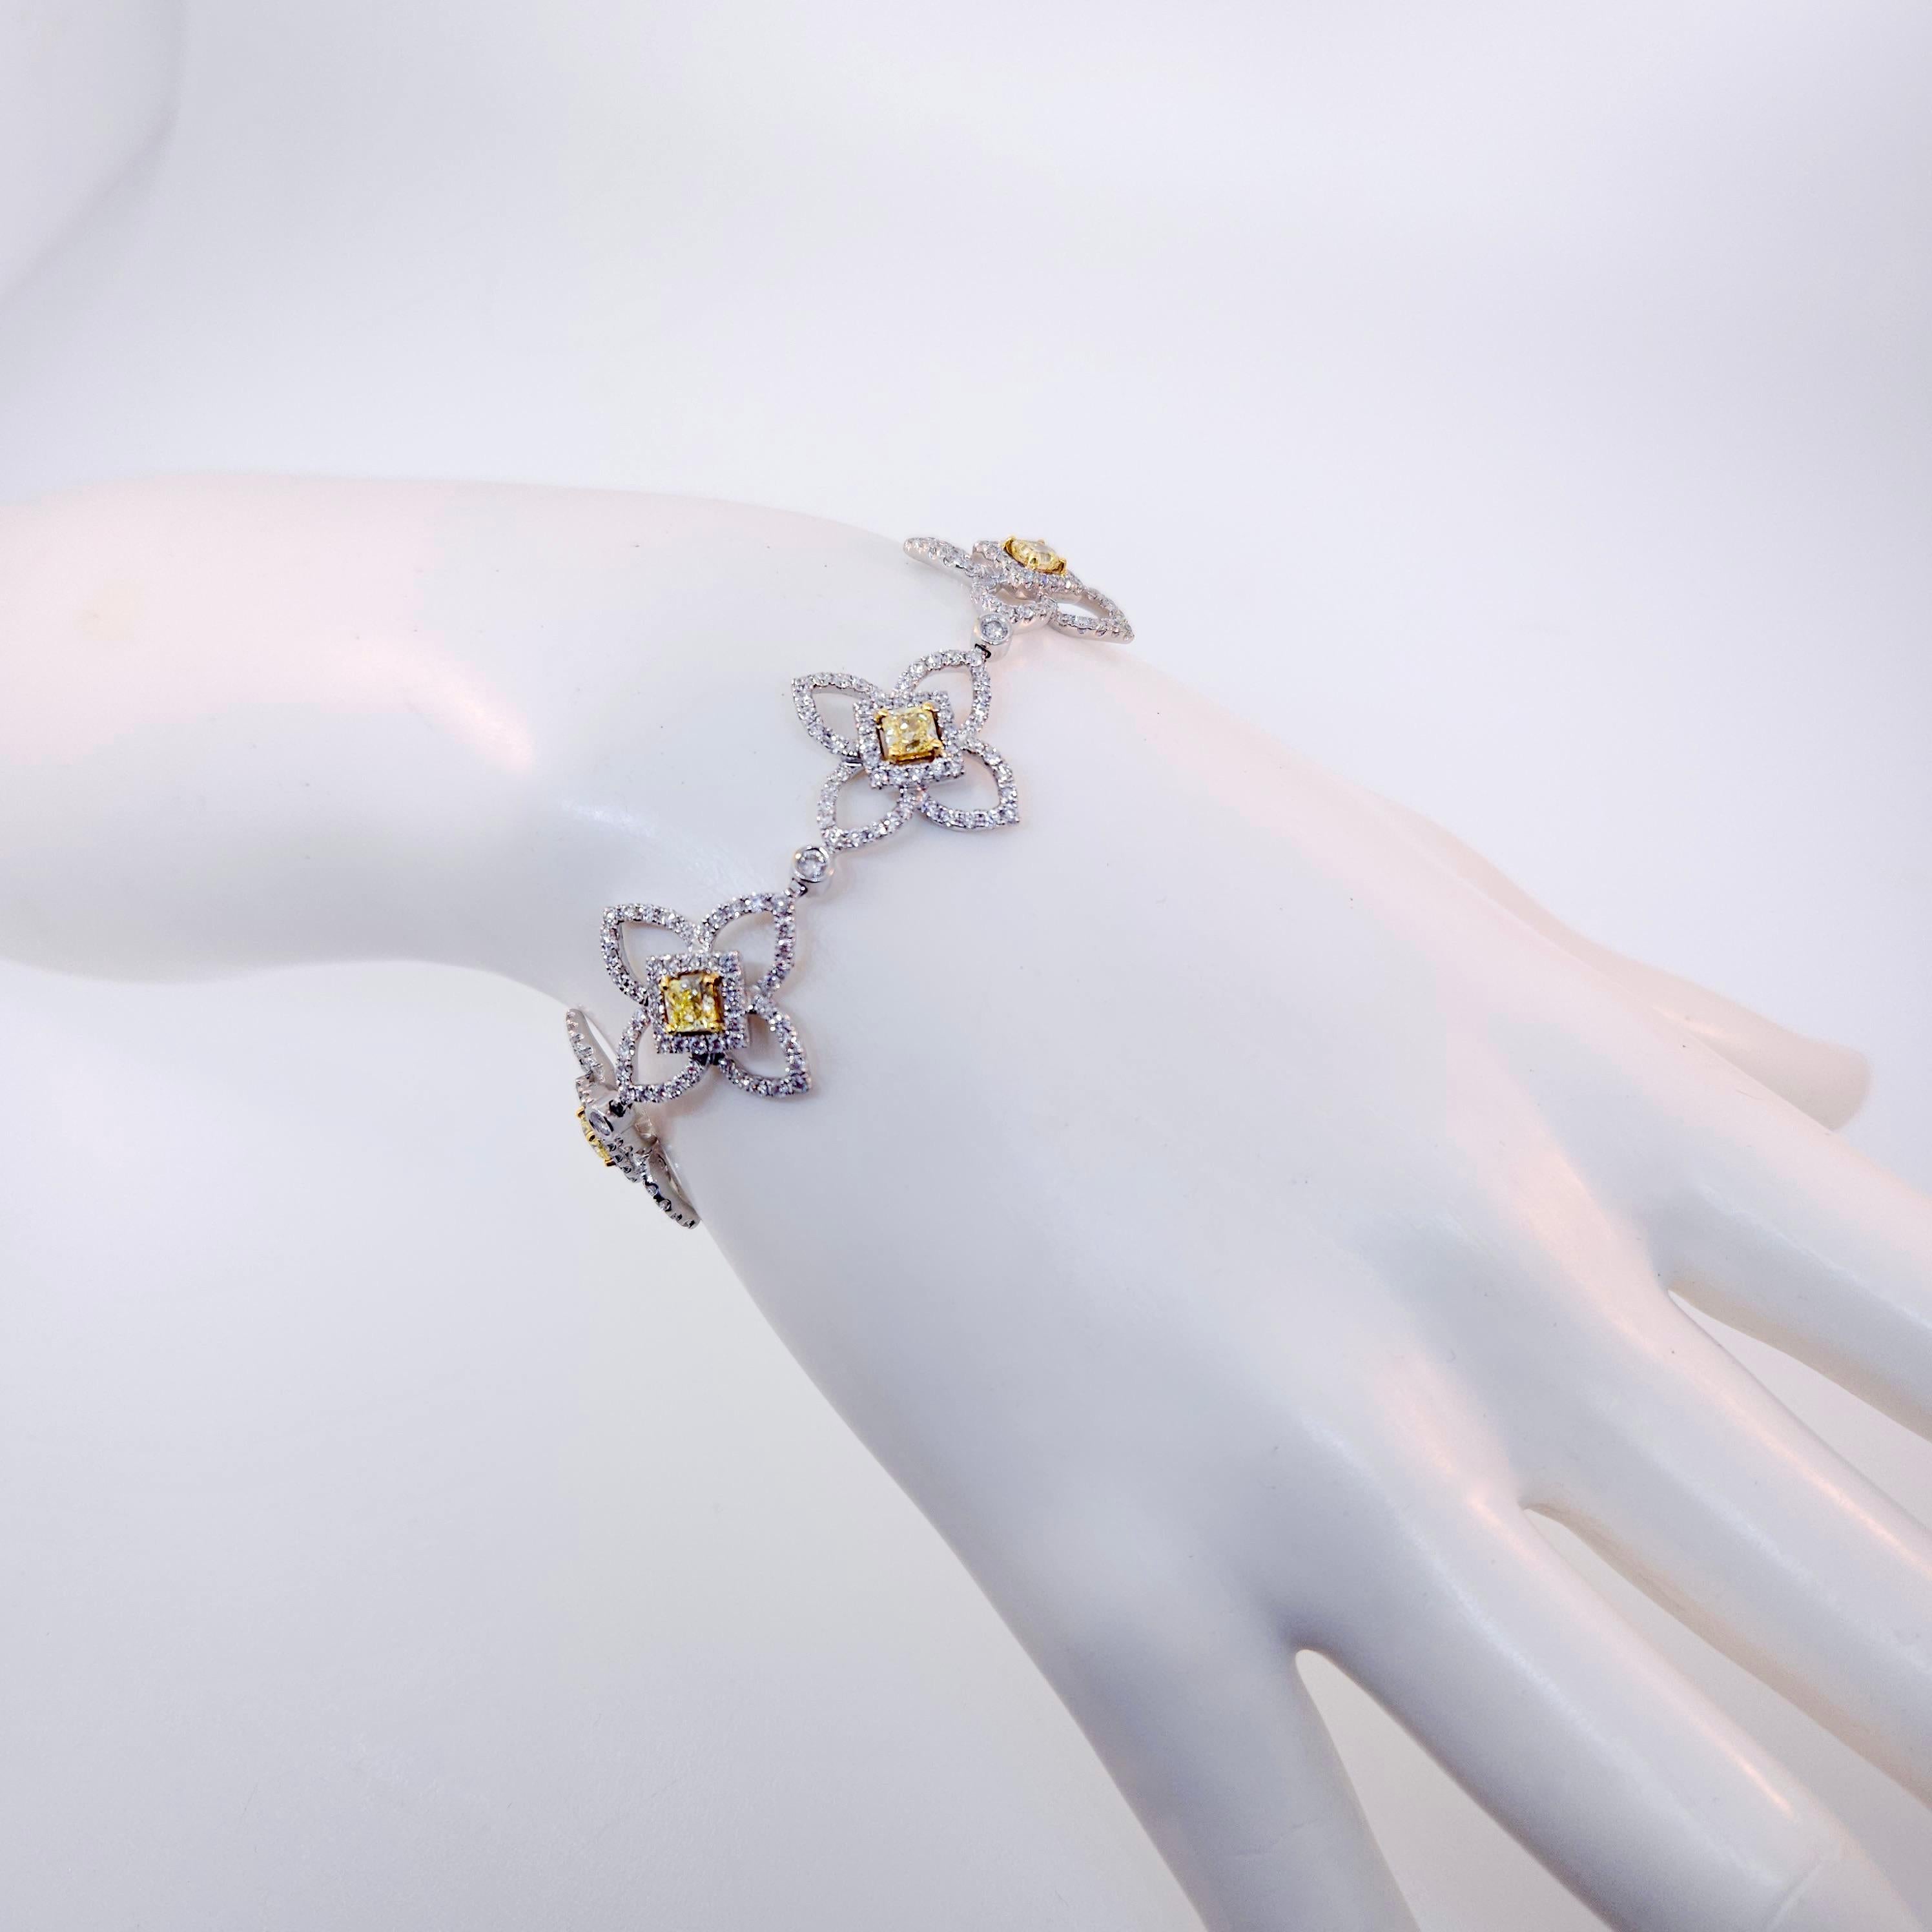 Thank you for viewing this beautiful 18k white gold diamond bracelet by Luca.  The bracelet contains diamonds with a total weight of 7.16 carats.  There are 7 fancy yellow color radiant cut diamonds measuring on average 3.3 to 3.5mm each which